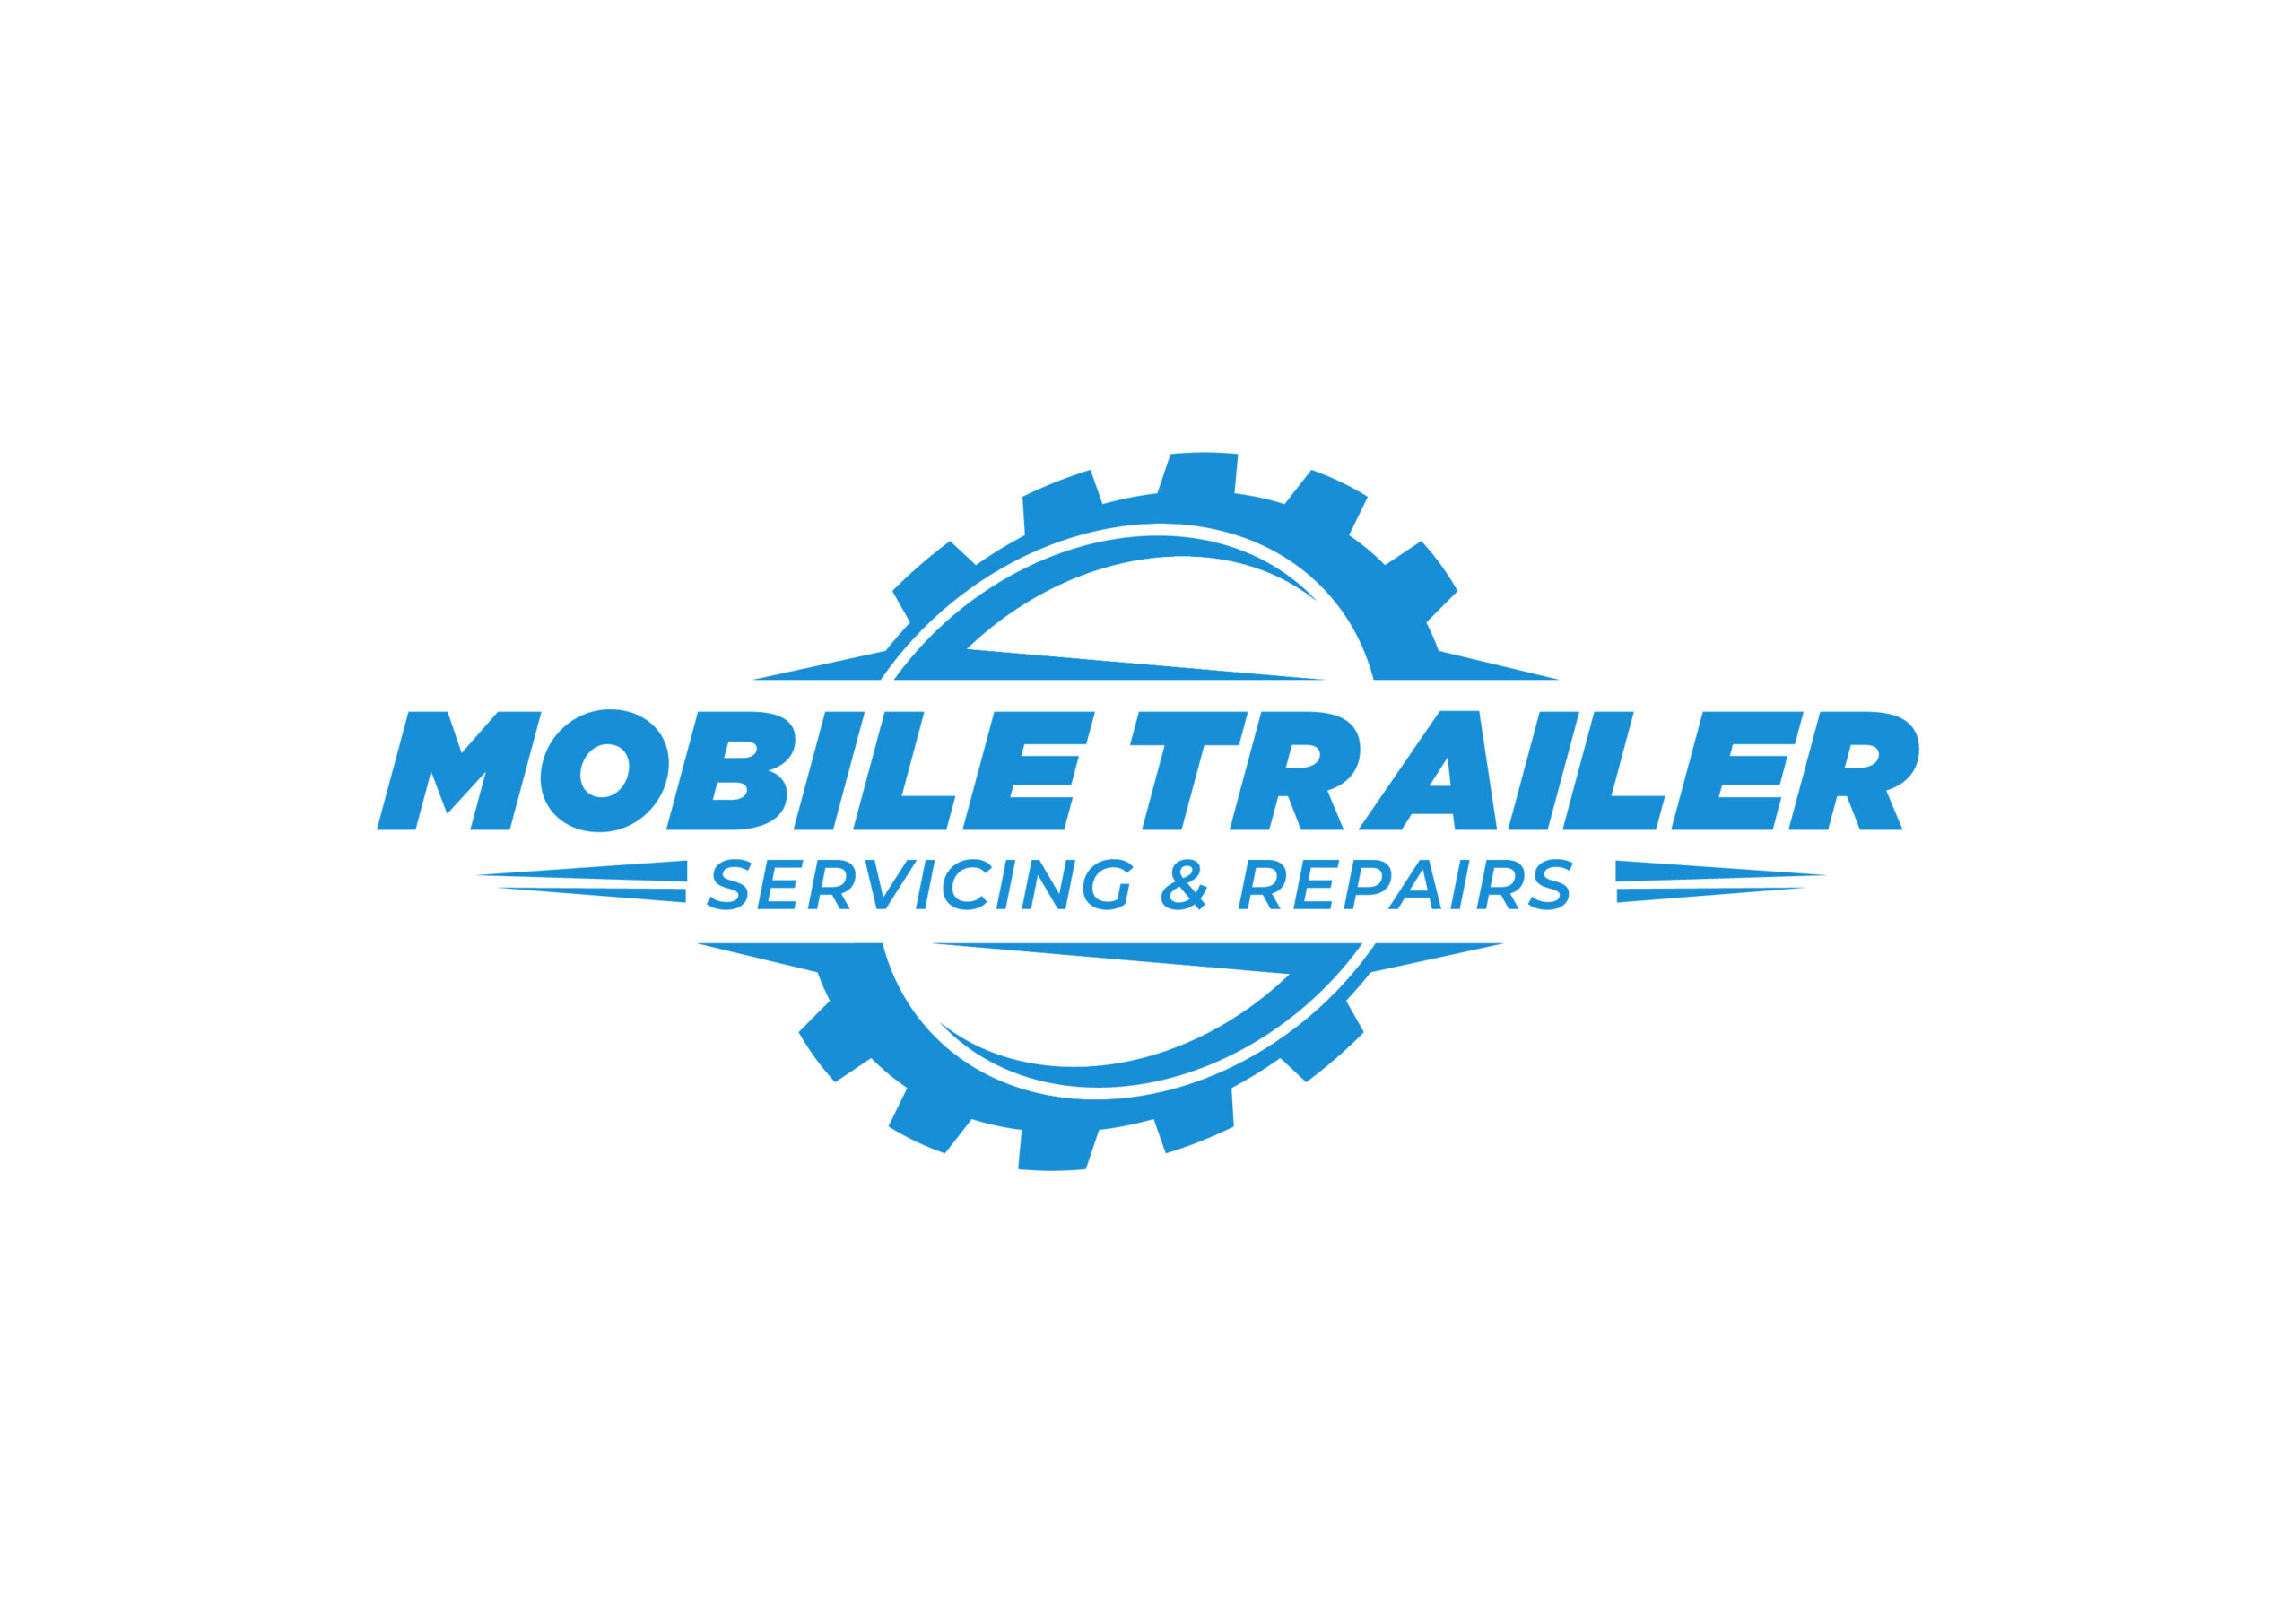 Mobile trailer servicing and repairs logo